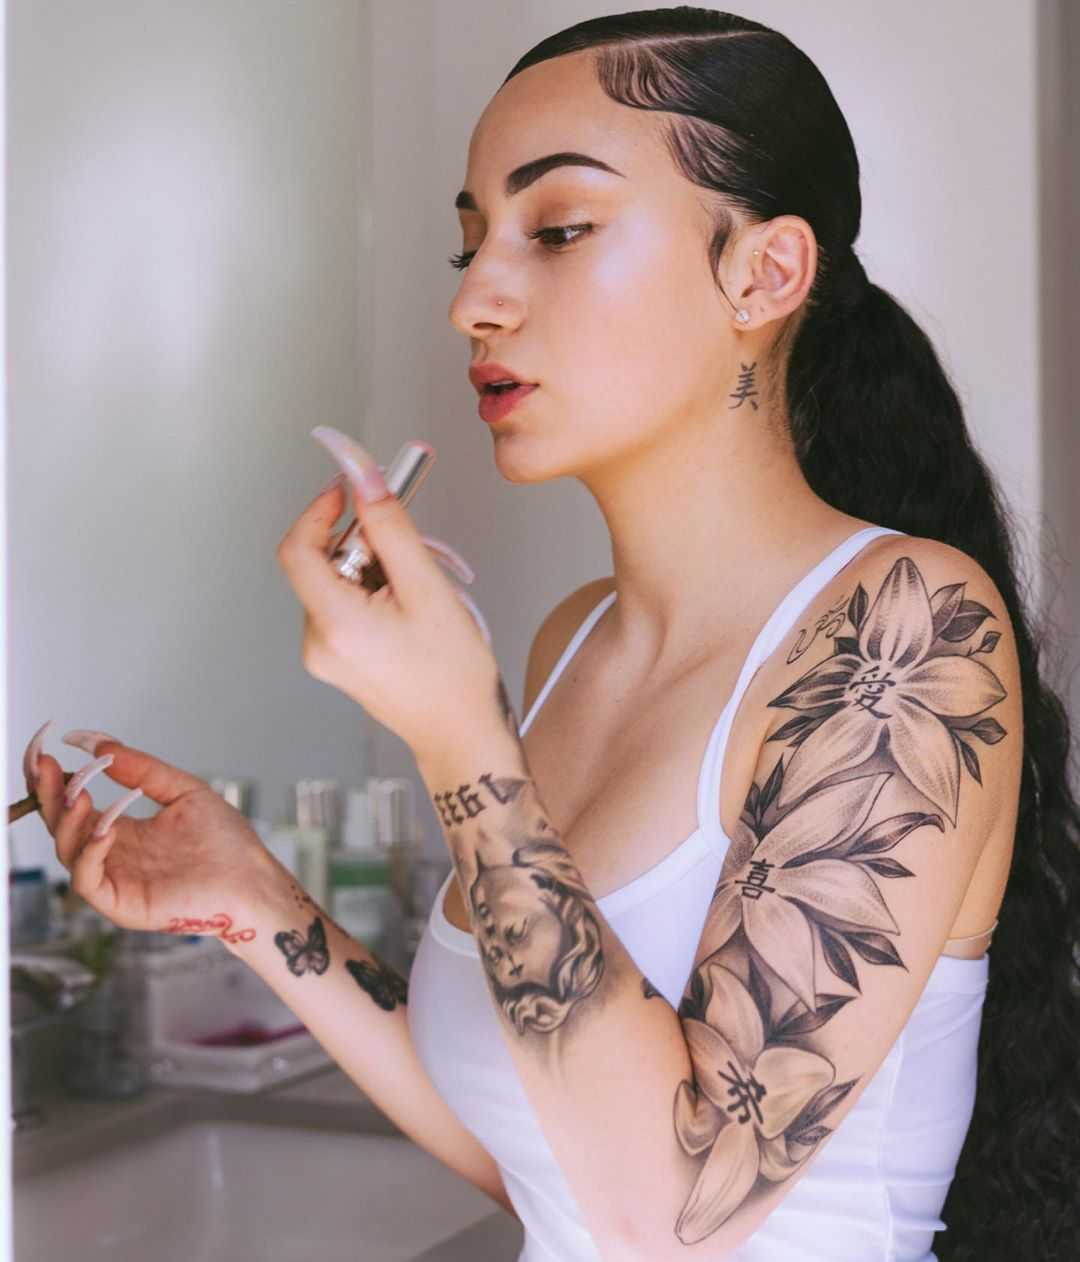 70+ Hot Pictures Of Danielle Bregoli aka Bhad Bhabie Which Will Win Your Heart 26